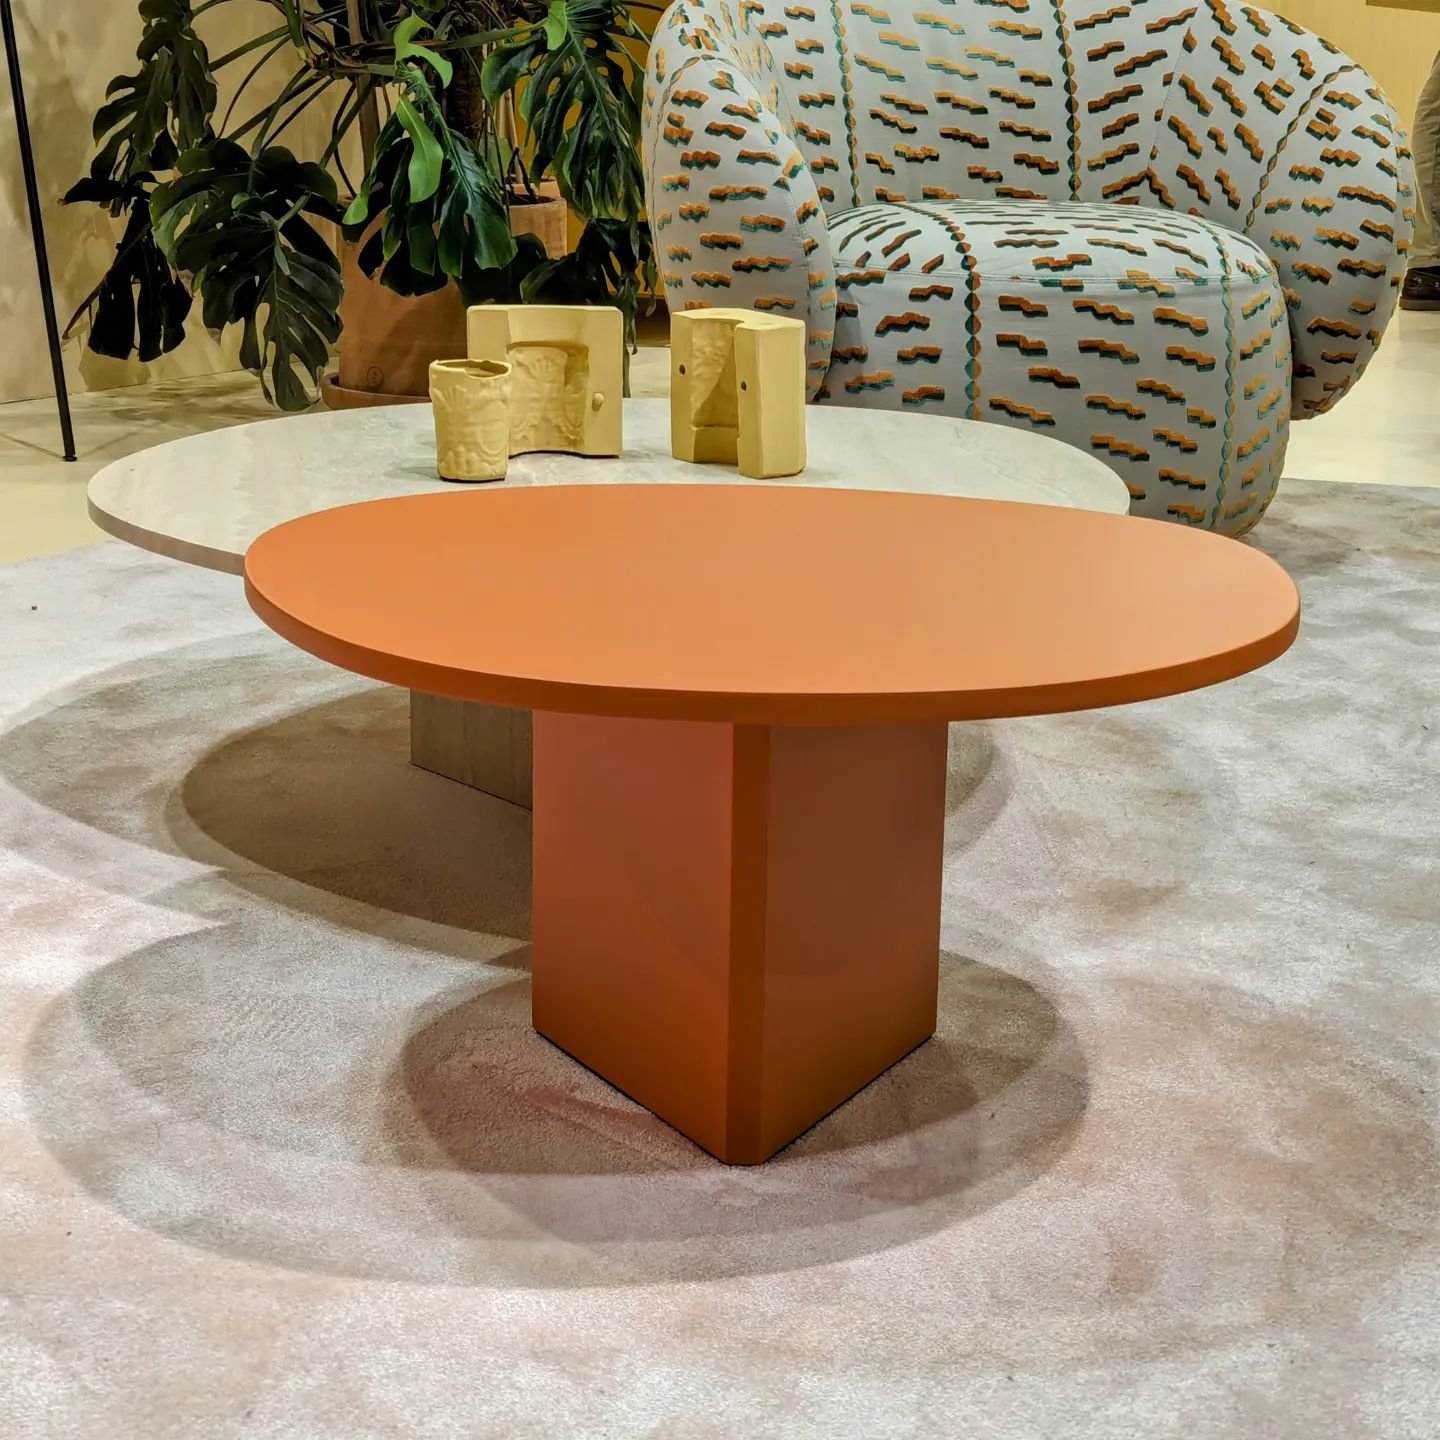 The new Albio coffee table collection that I designed for the Italian brand @miniformsofficial . Launched this week at the Salone del mobile, this collection features a triangular base that contrasts an organically shaped top.

@isaloniofficial 

Her